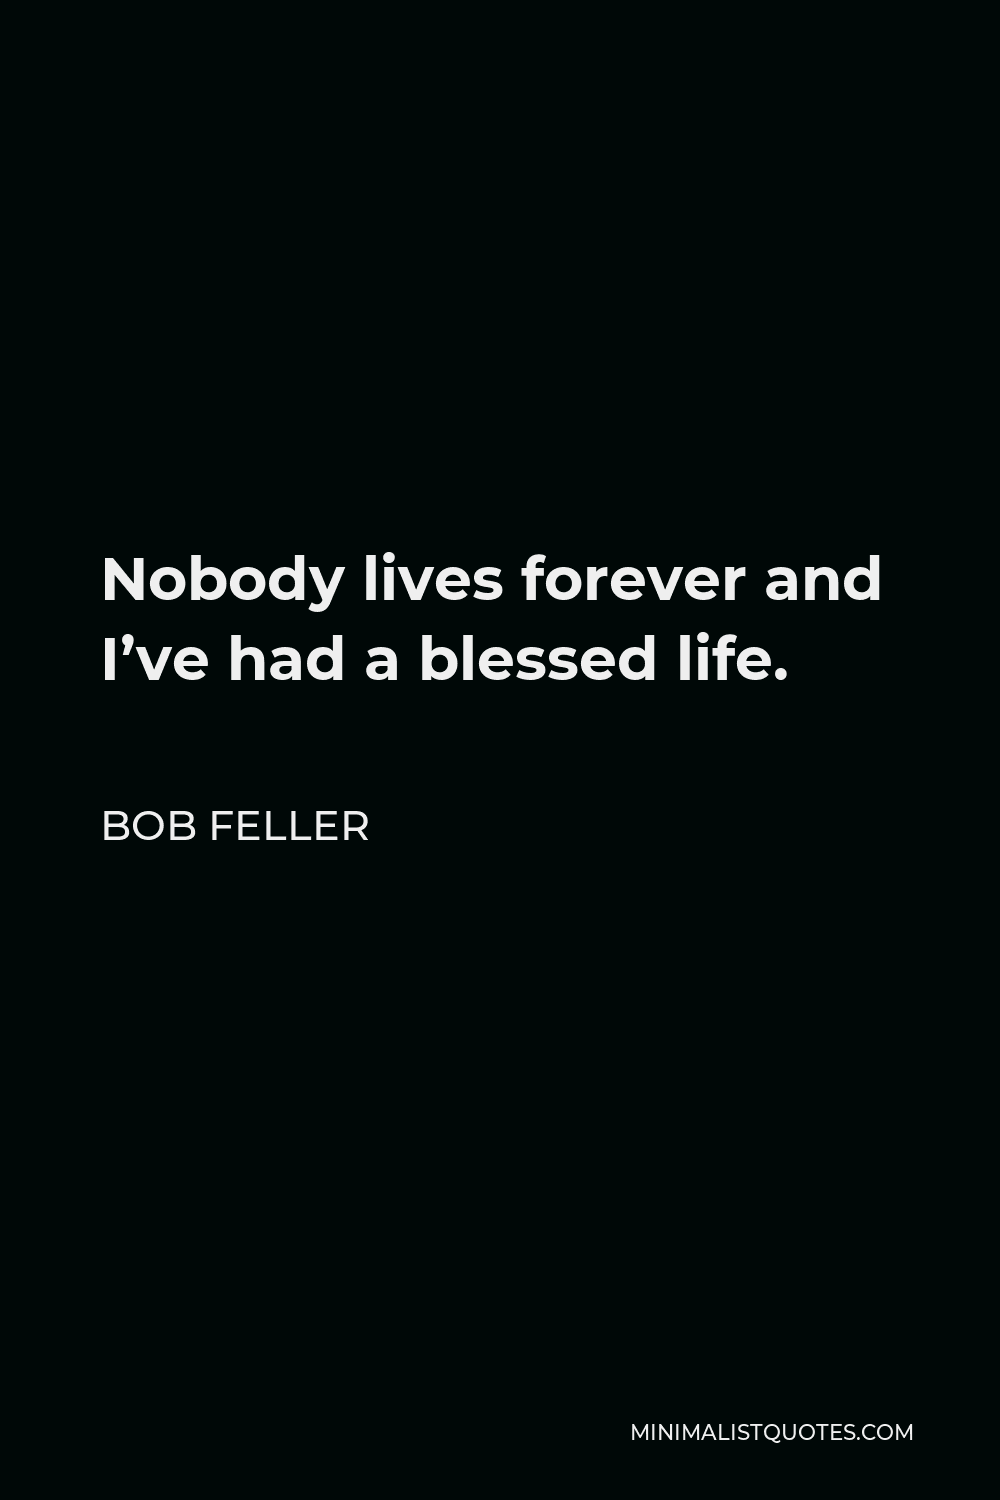 Bob Feller Quote - Nobody lives forever and I’ve had a blessed life.